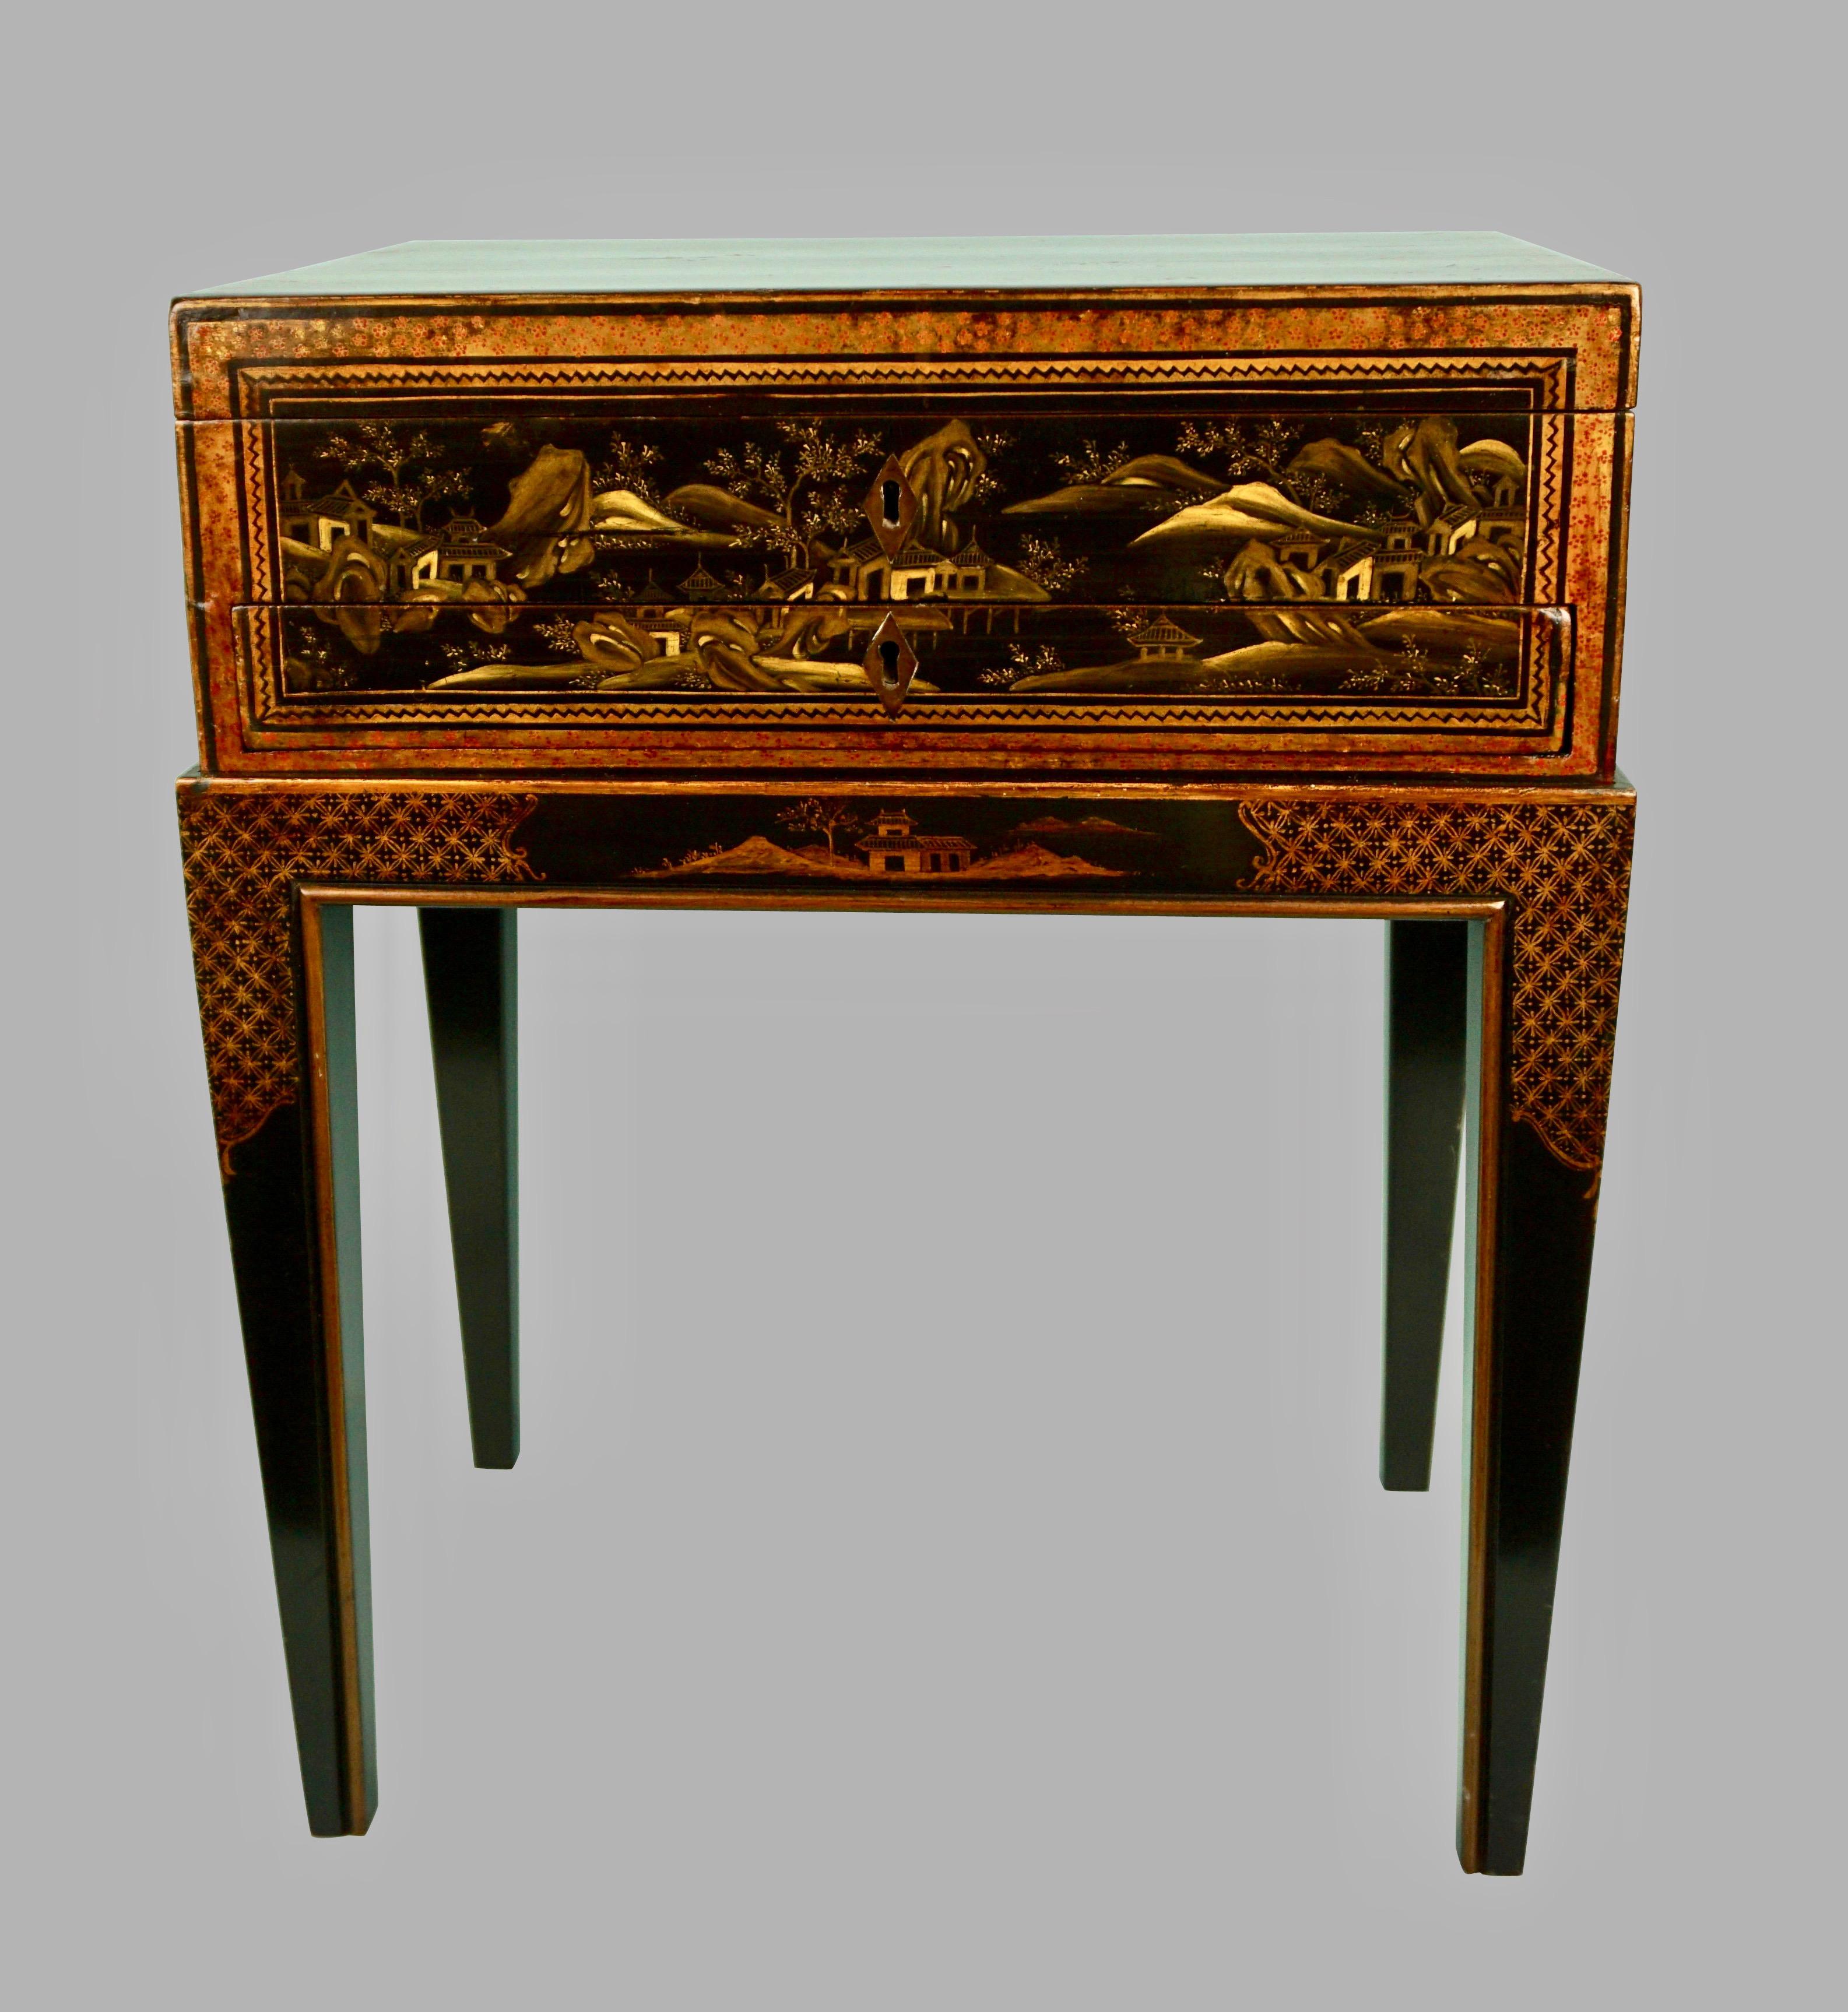 A pretty Chinese export black lacquer work box with a central drawer and side handles, the fitted interior with a retractable slide and pen tray, now mounted on a later custom made Chinoiserie stand. Box circa 1870-1890.